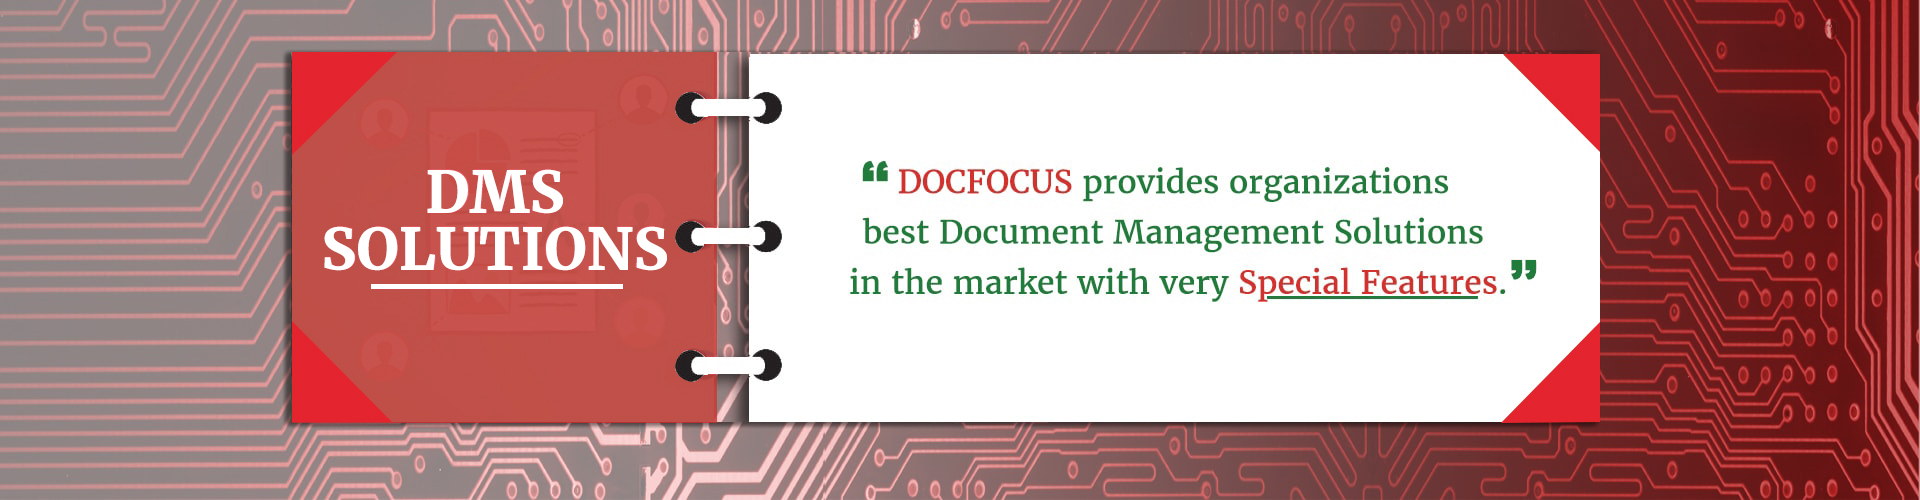 About DOCFOCUS Banner